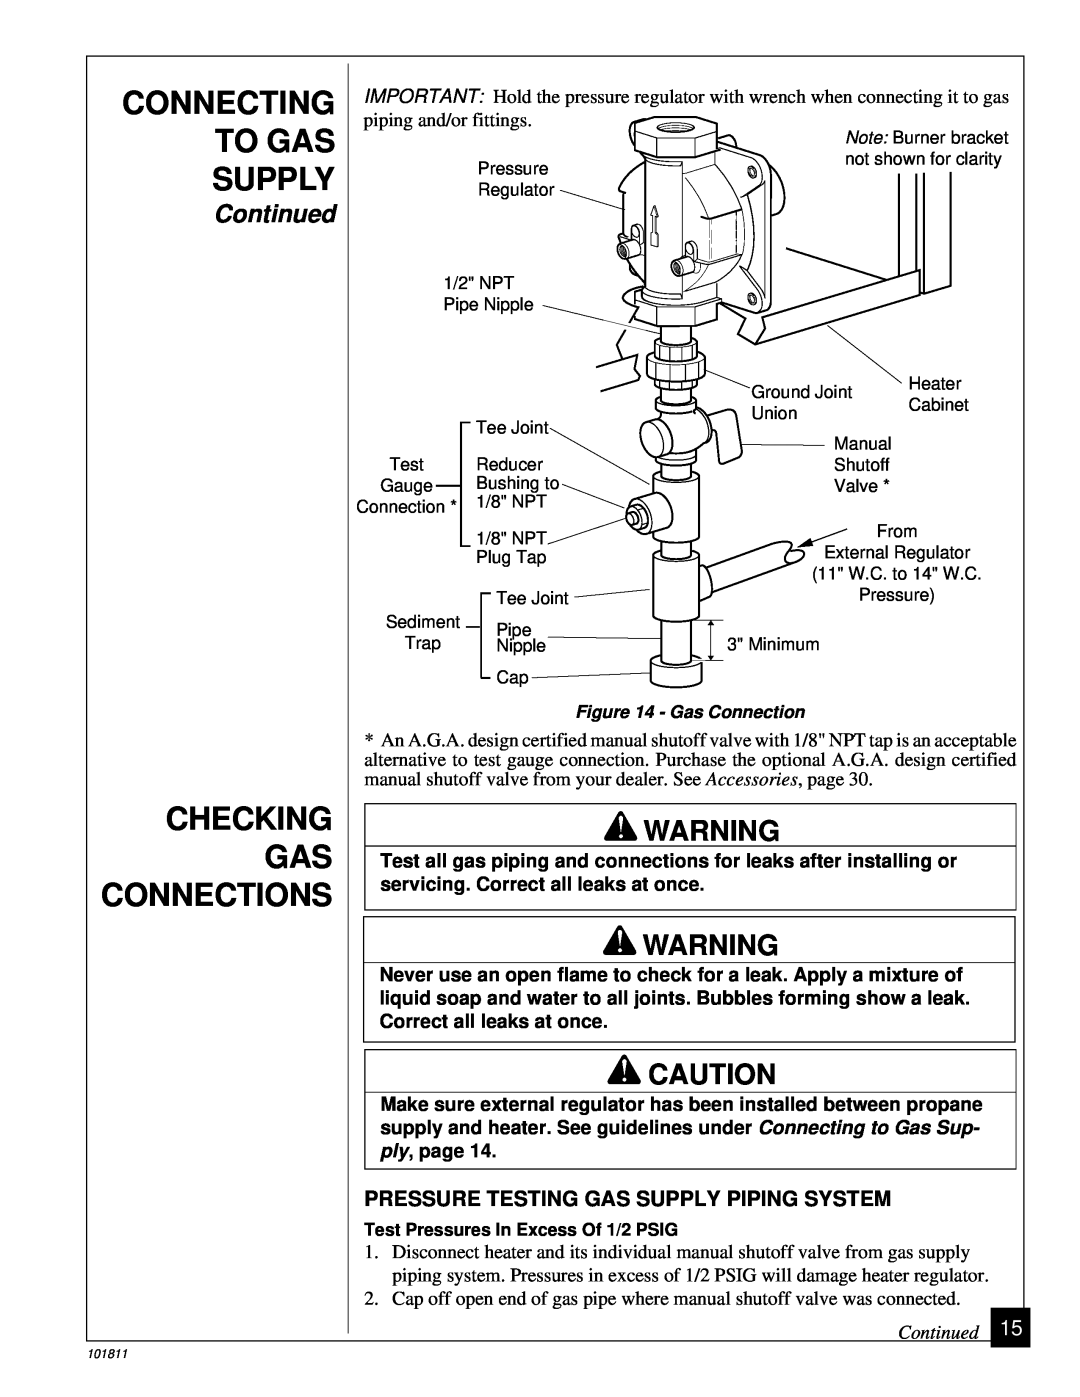 Desa 101811-01C.pdf installation manual Checking Gas Connections, Connecting To Gas Supply, Continued 